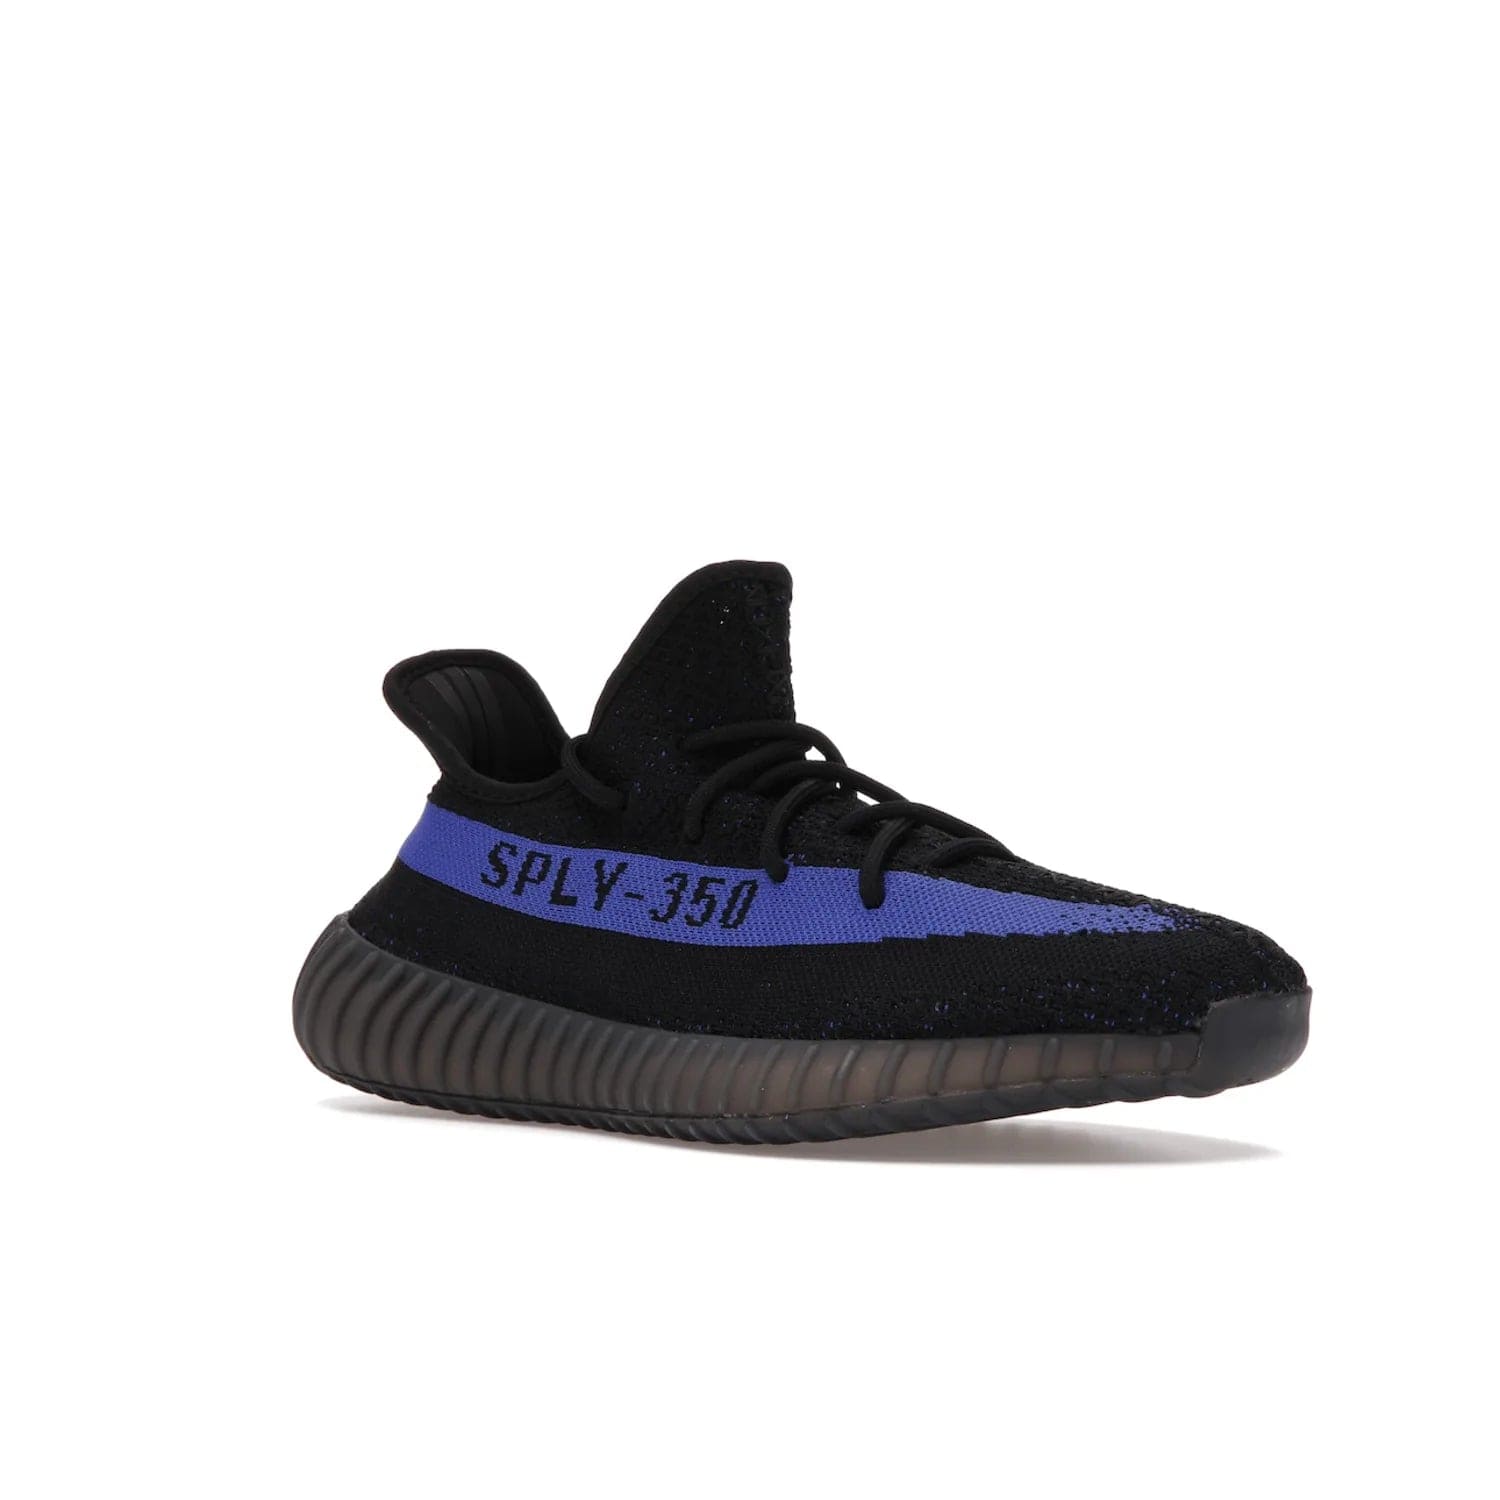 adidas Yeezy Boost 350 V2 Dazzling Blue - Image 5 - Only at www.BallersClubKickz.com - Shop the Adidas Yeezy 350 V2 Dazzling Blue, featuring a solid black Primeknit upper, Dazzling Blue side stripe, “SPLY-350” text, and a muted Boost sole. Releasing Feb 2022, this style is perfect for any shoe fan.